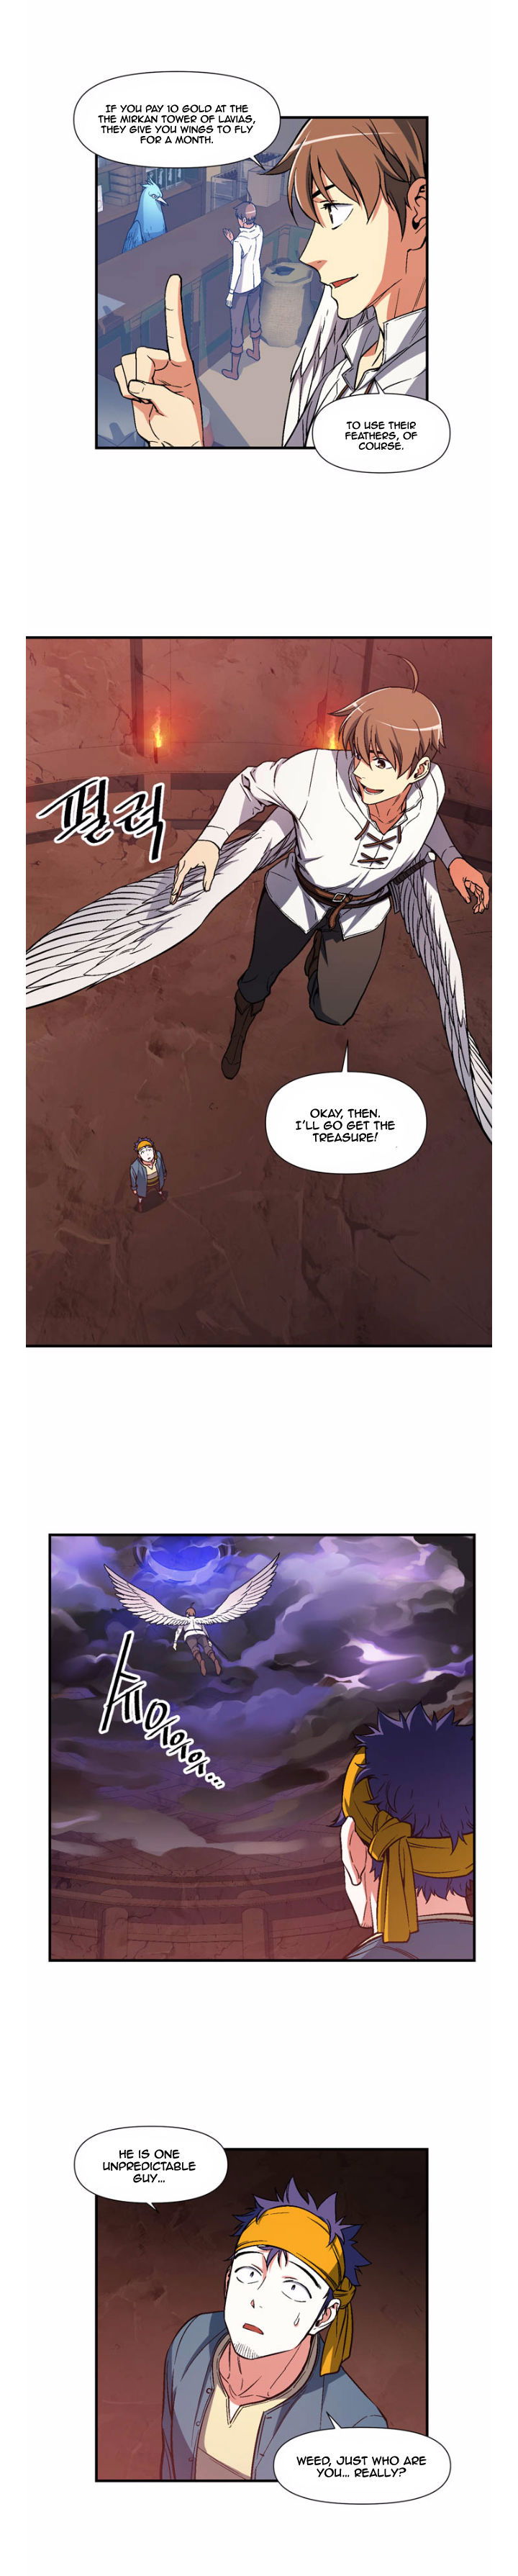 The Legendary Moonlight Sculptor Chapter 68 page 13